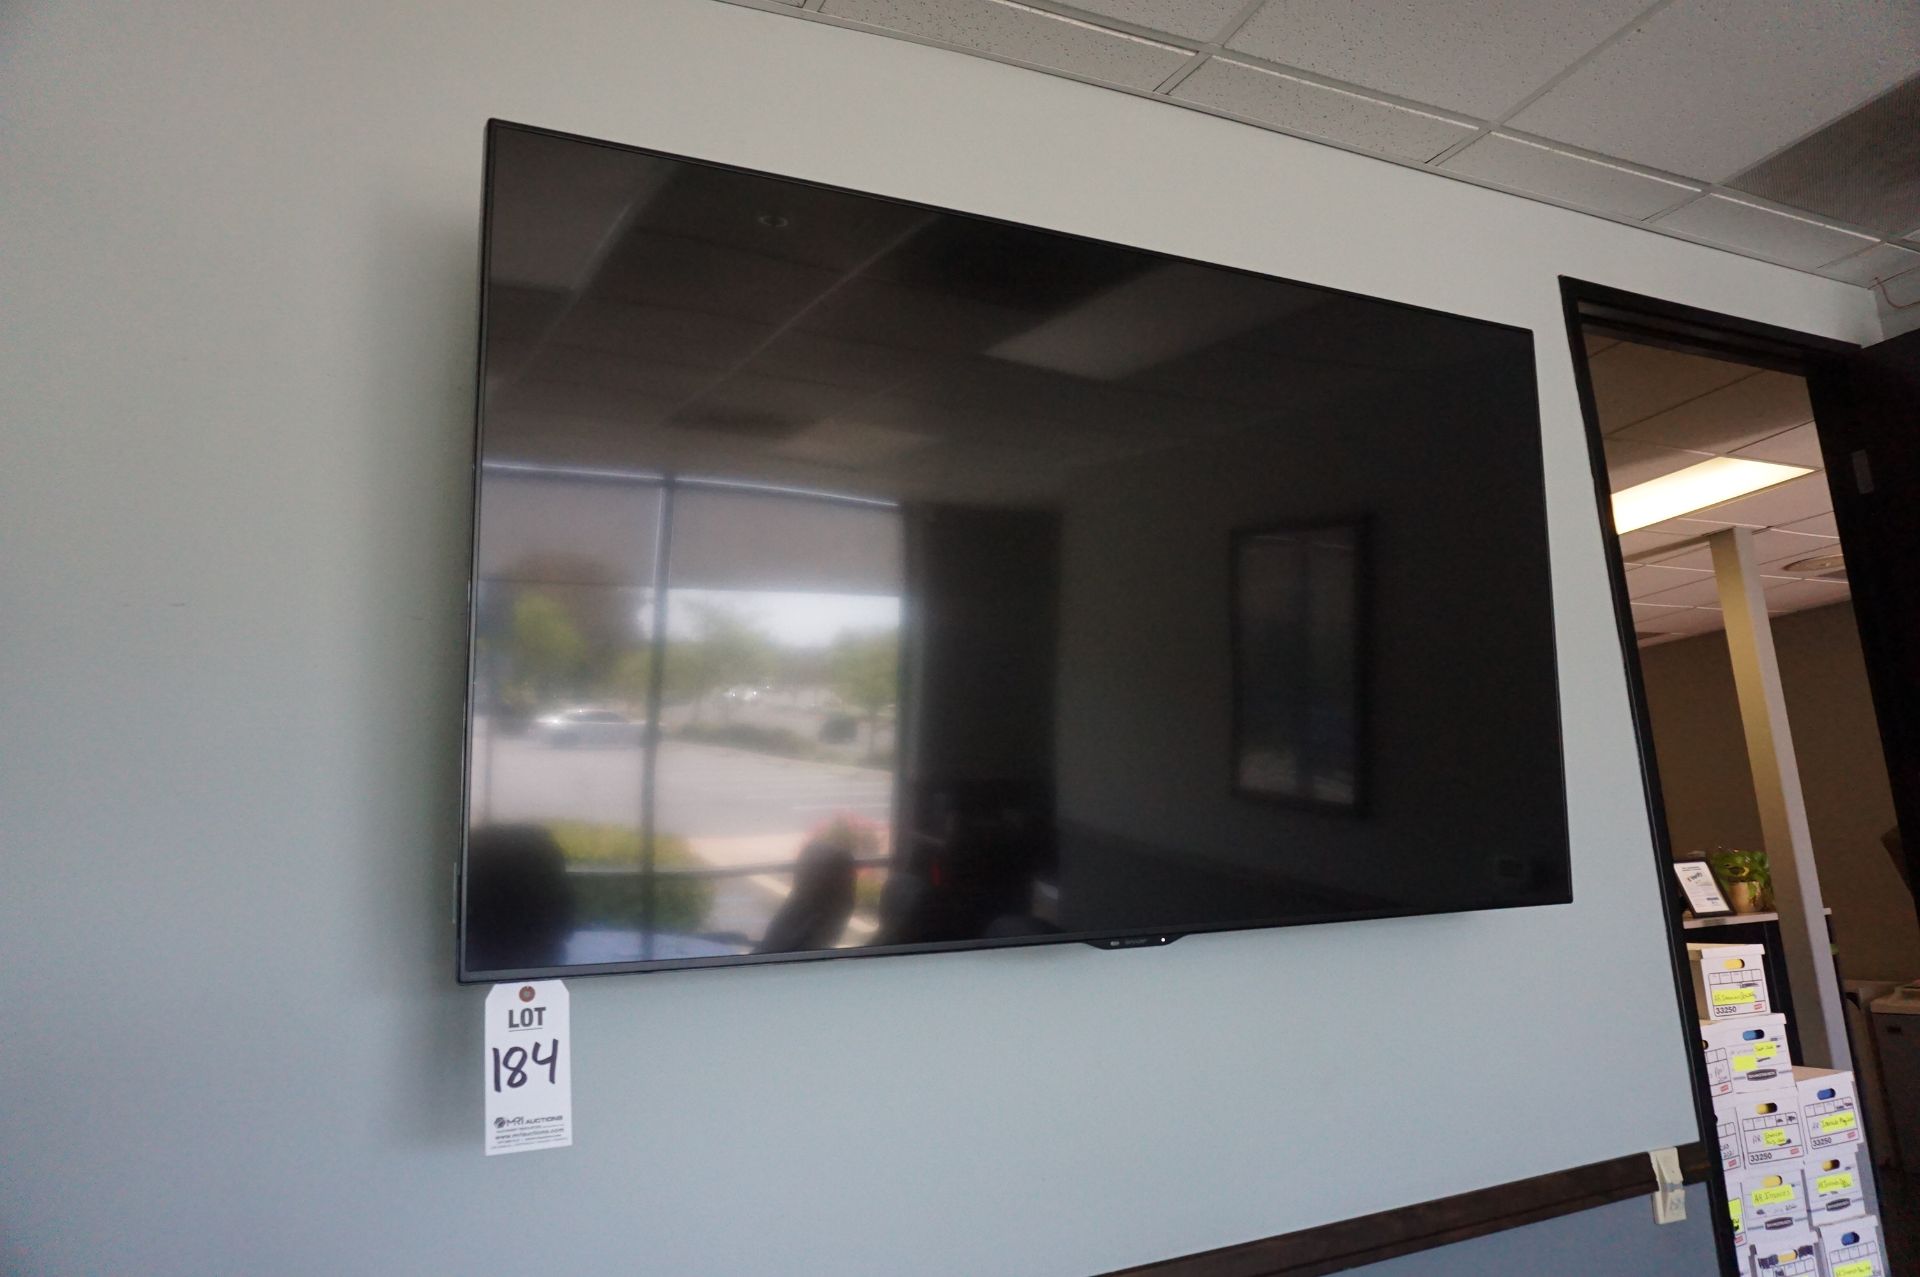 70" SHARP AQUOS INTERACTIVE DISPLAY SYSTEM WITH REMOTE